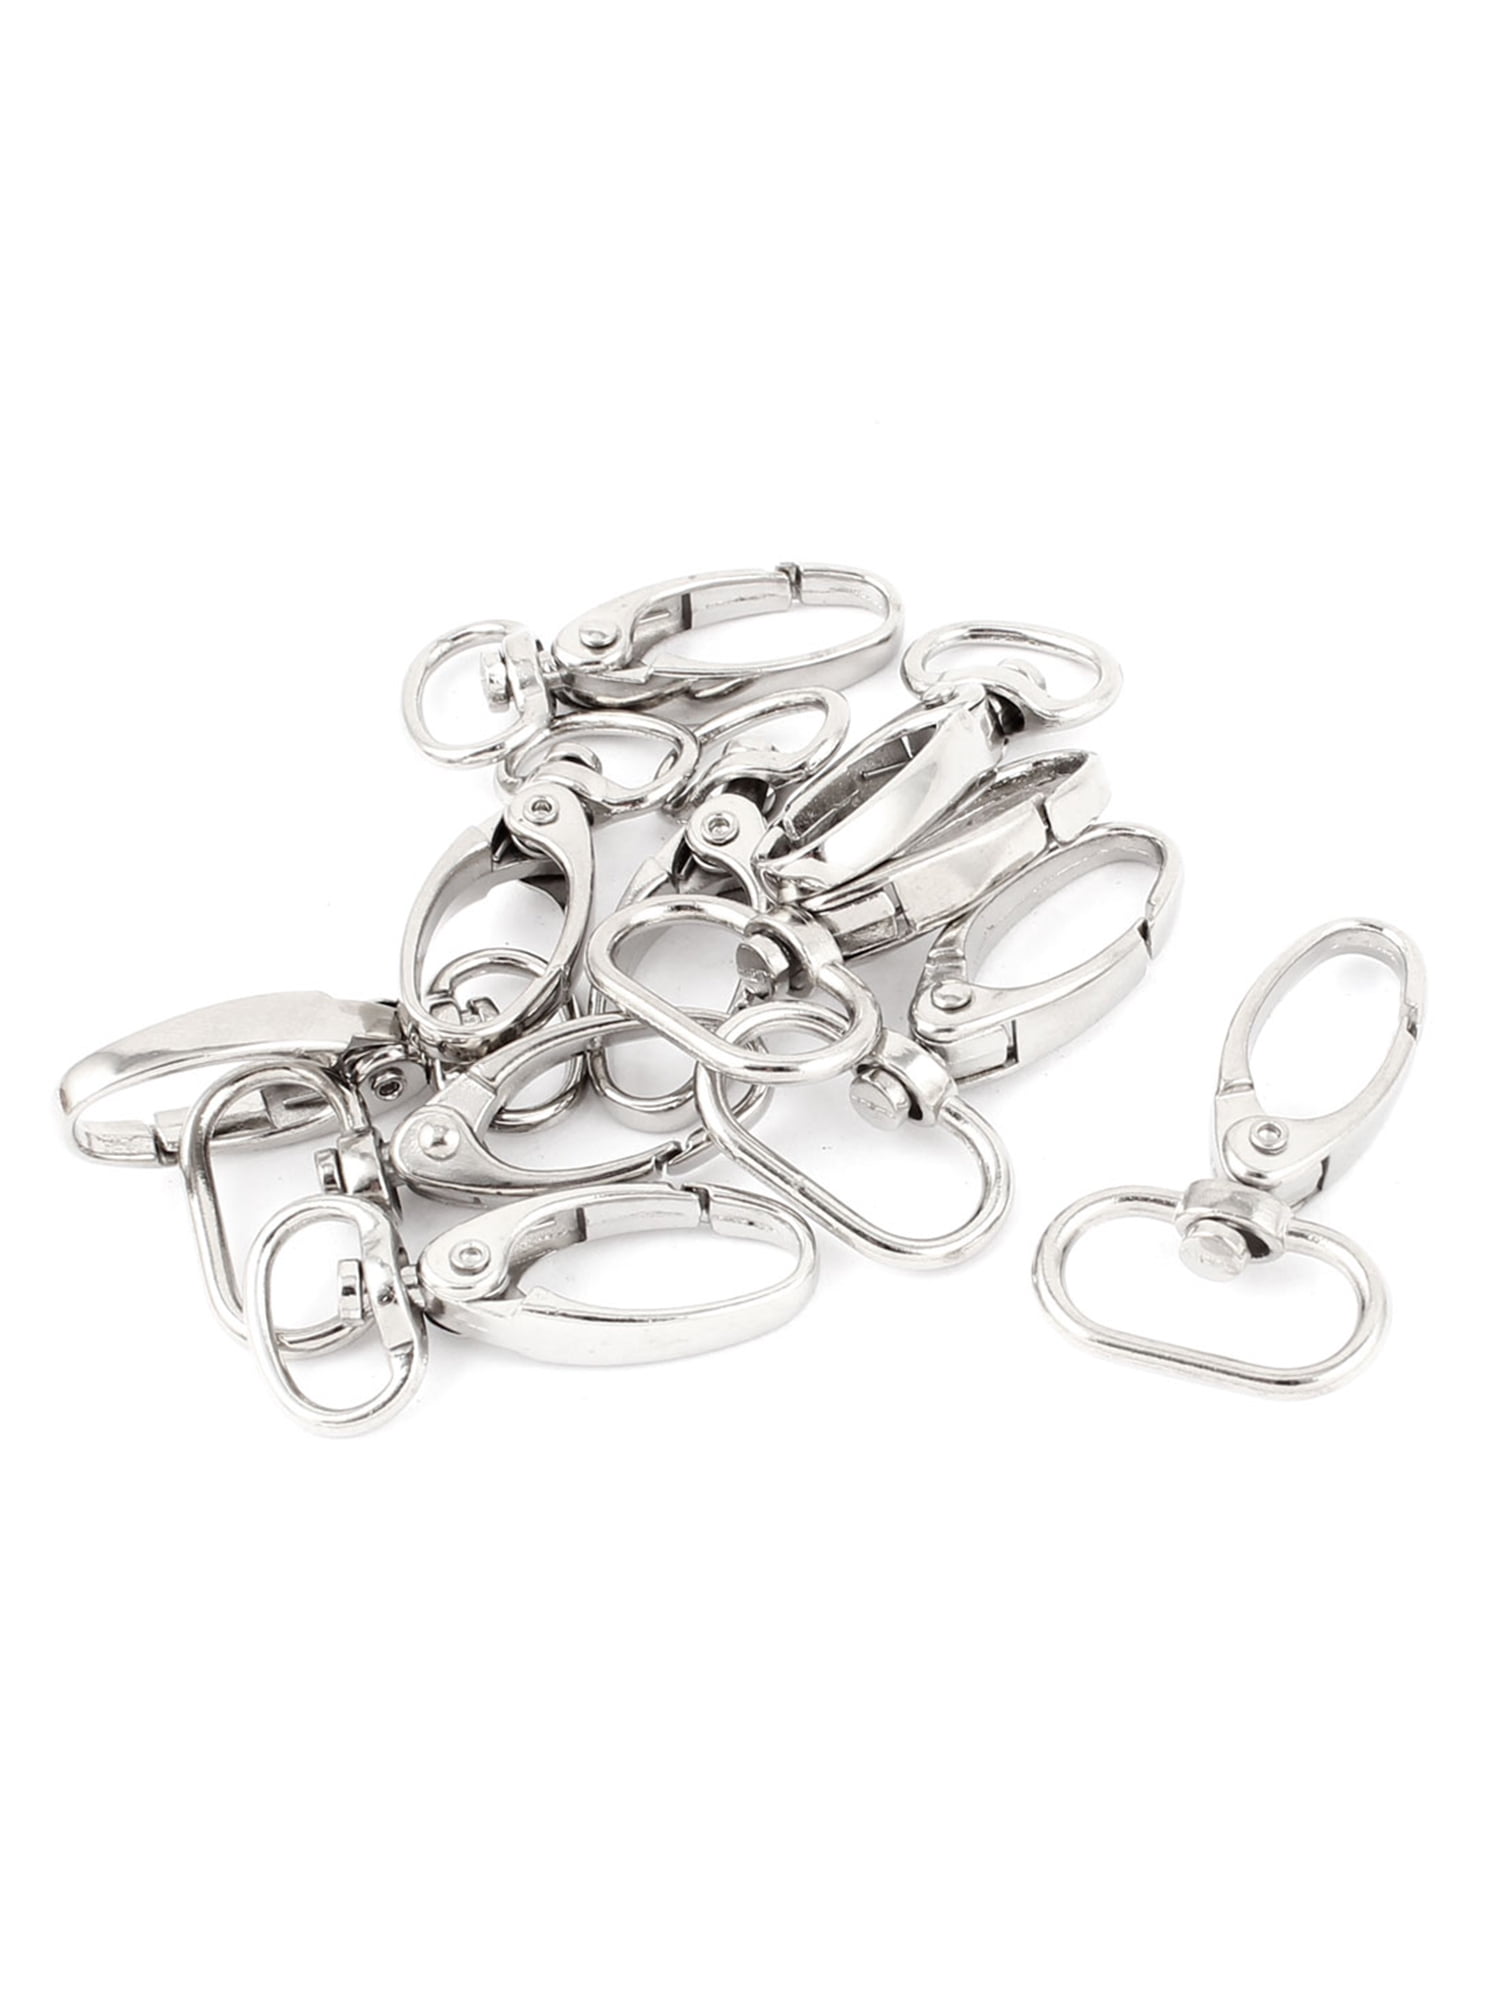 10PCS Metal Lobster Claw Clasp Swivel Buckles Hooks For Bag Keychain/Key Ring